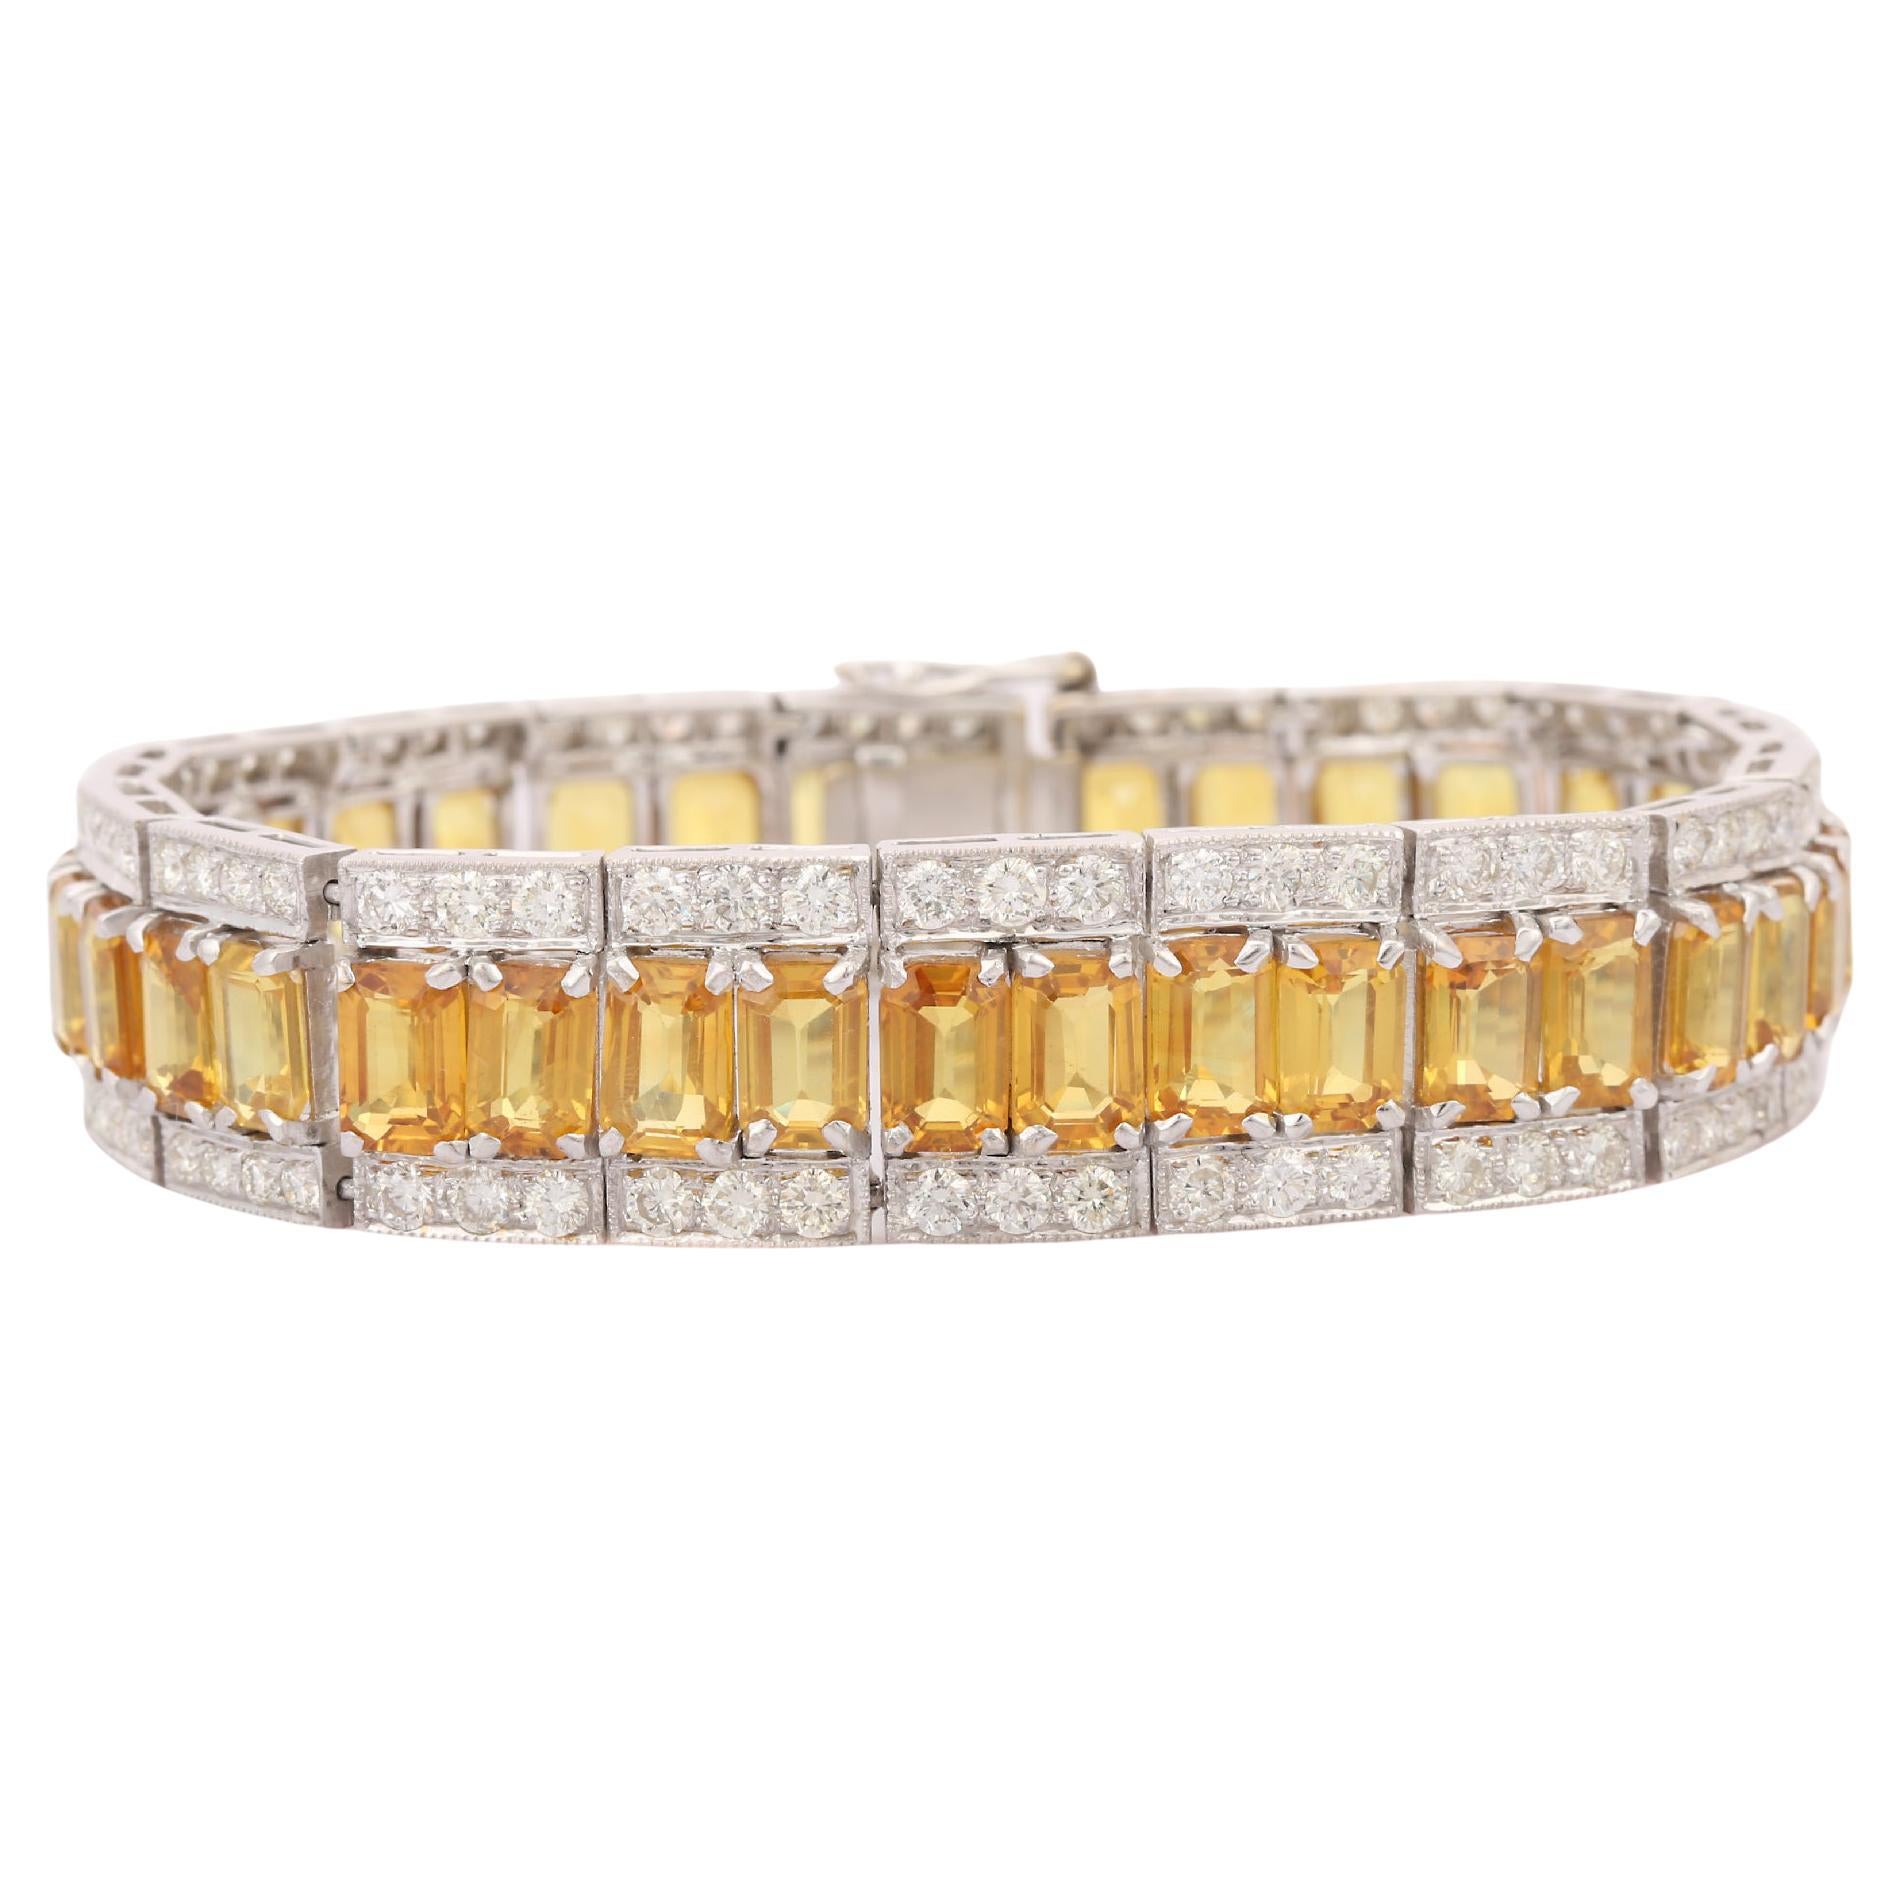 Natural 37.87 Ct Yellow Sapphire 5.34 Ct Diamond Bracelet 18kt Solid White Gold For Sale